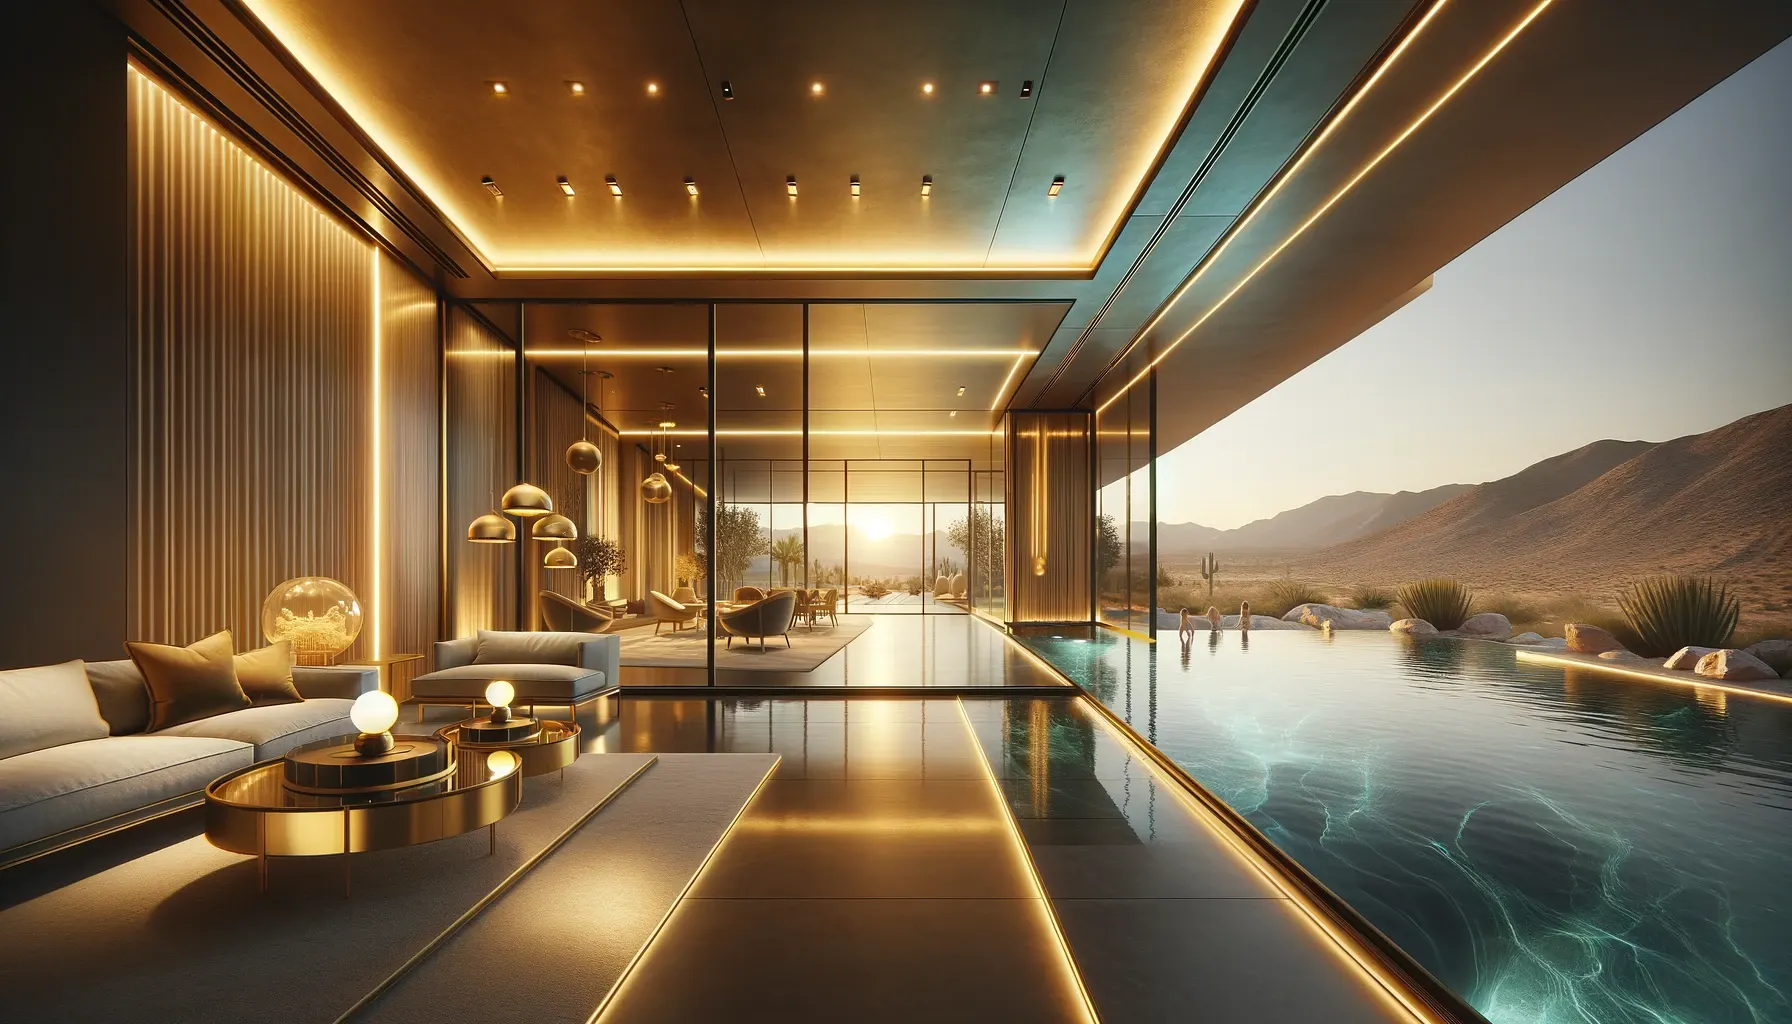 Expansive modern home interior with warm golden lighting and infinity pool opening to a desert landscape, in a 16:9 widescreen view.